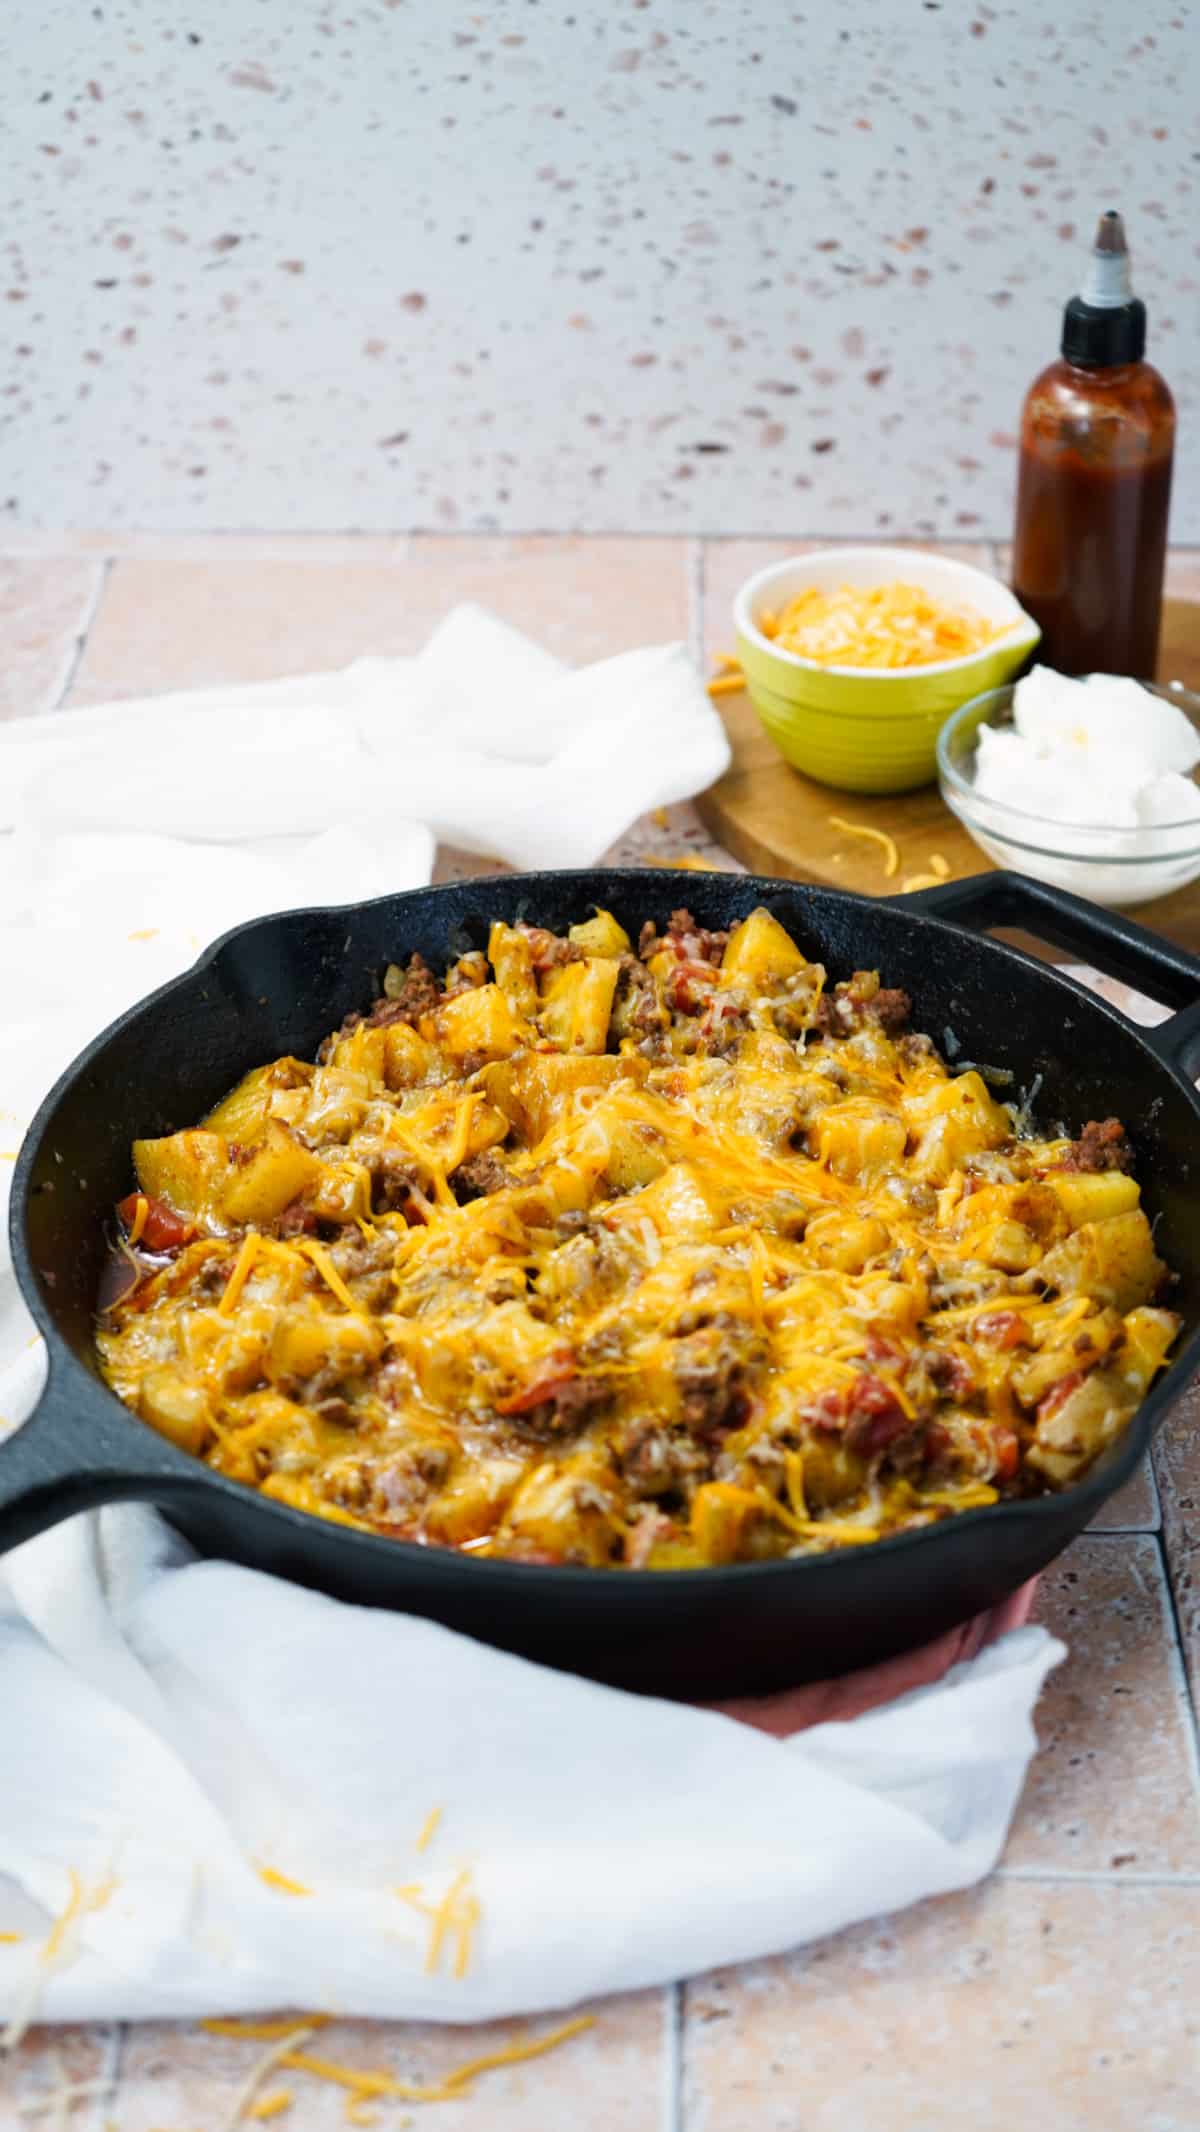 Potatoes with taco meat